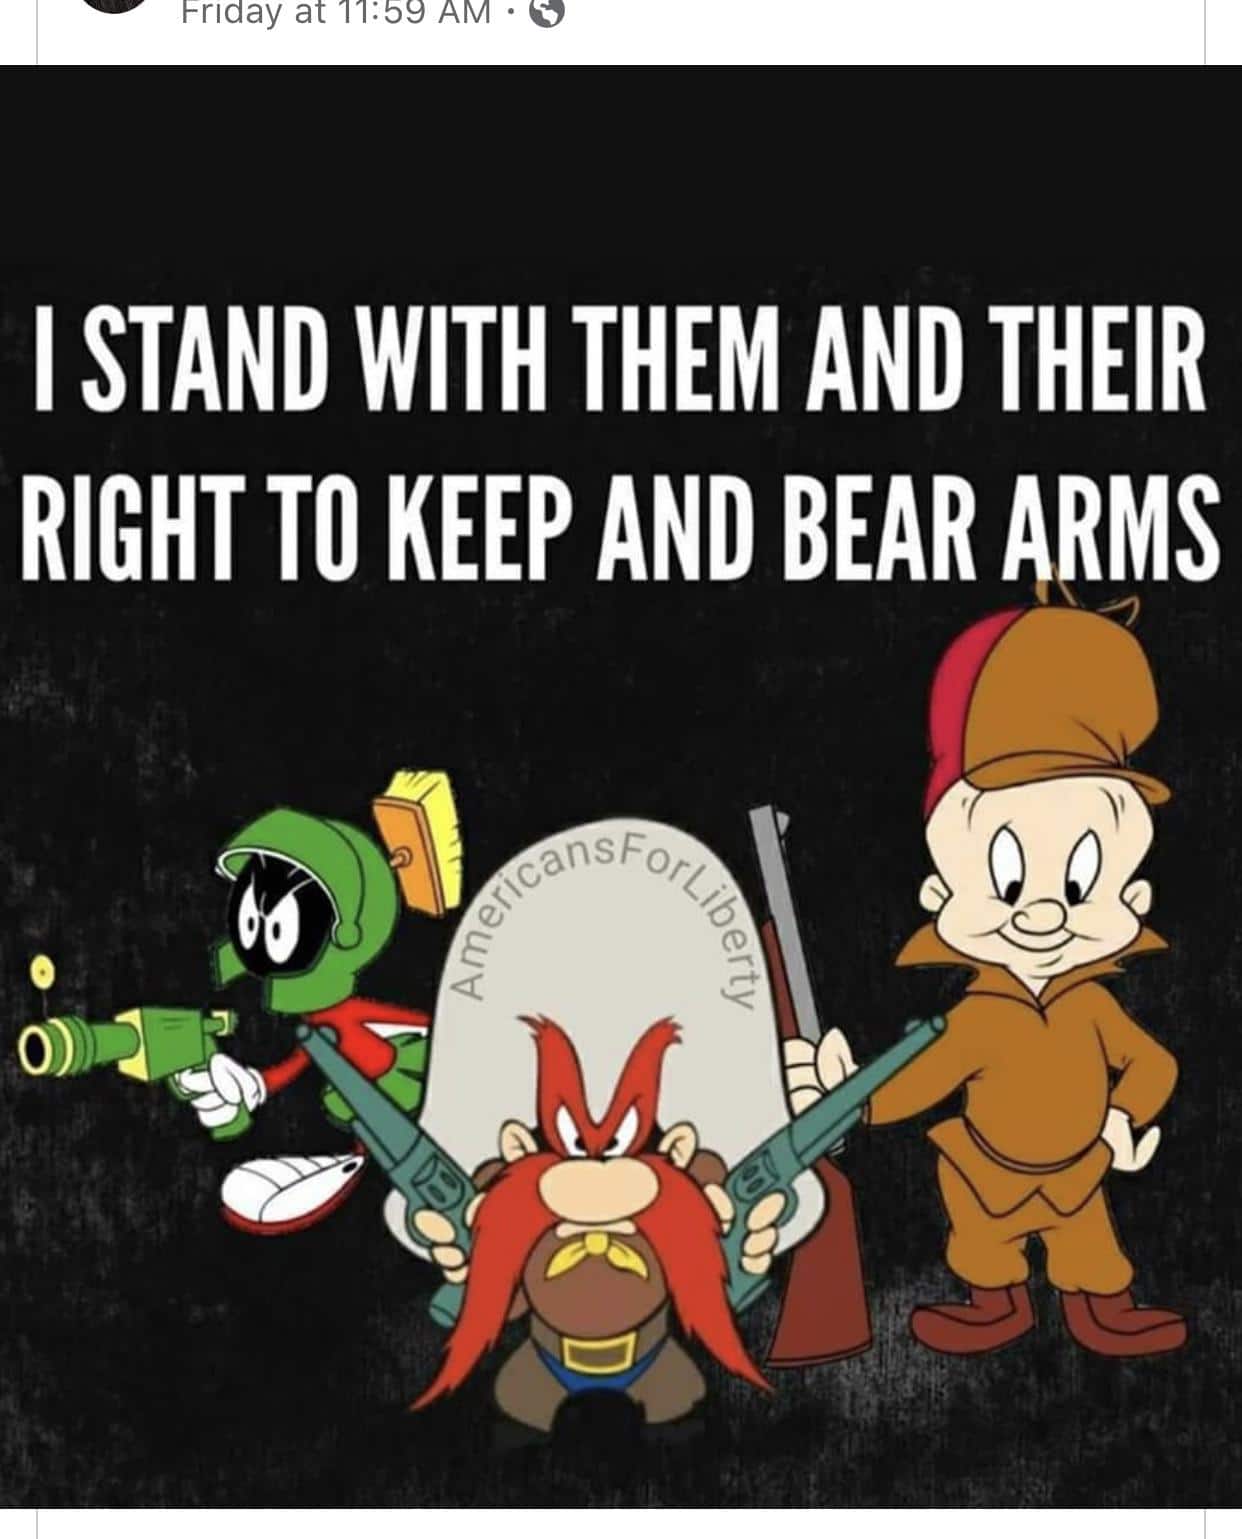 Political, Martian, Marvin, Elmer Fudd, Bugs Bunny boomer memes Political, Martian, Marvin, Elmer Fudd, Bugs Bunny text: Friday at I STAND WITH THEM AND THEIR RIGHT TO KEEP AND BEAR ARMS consFor 